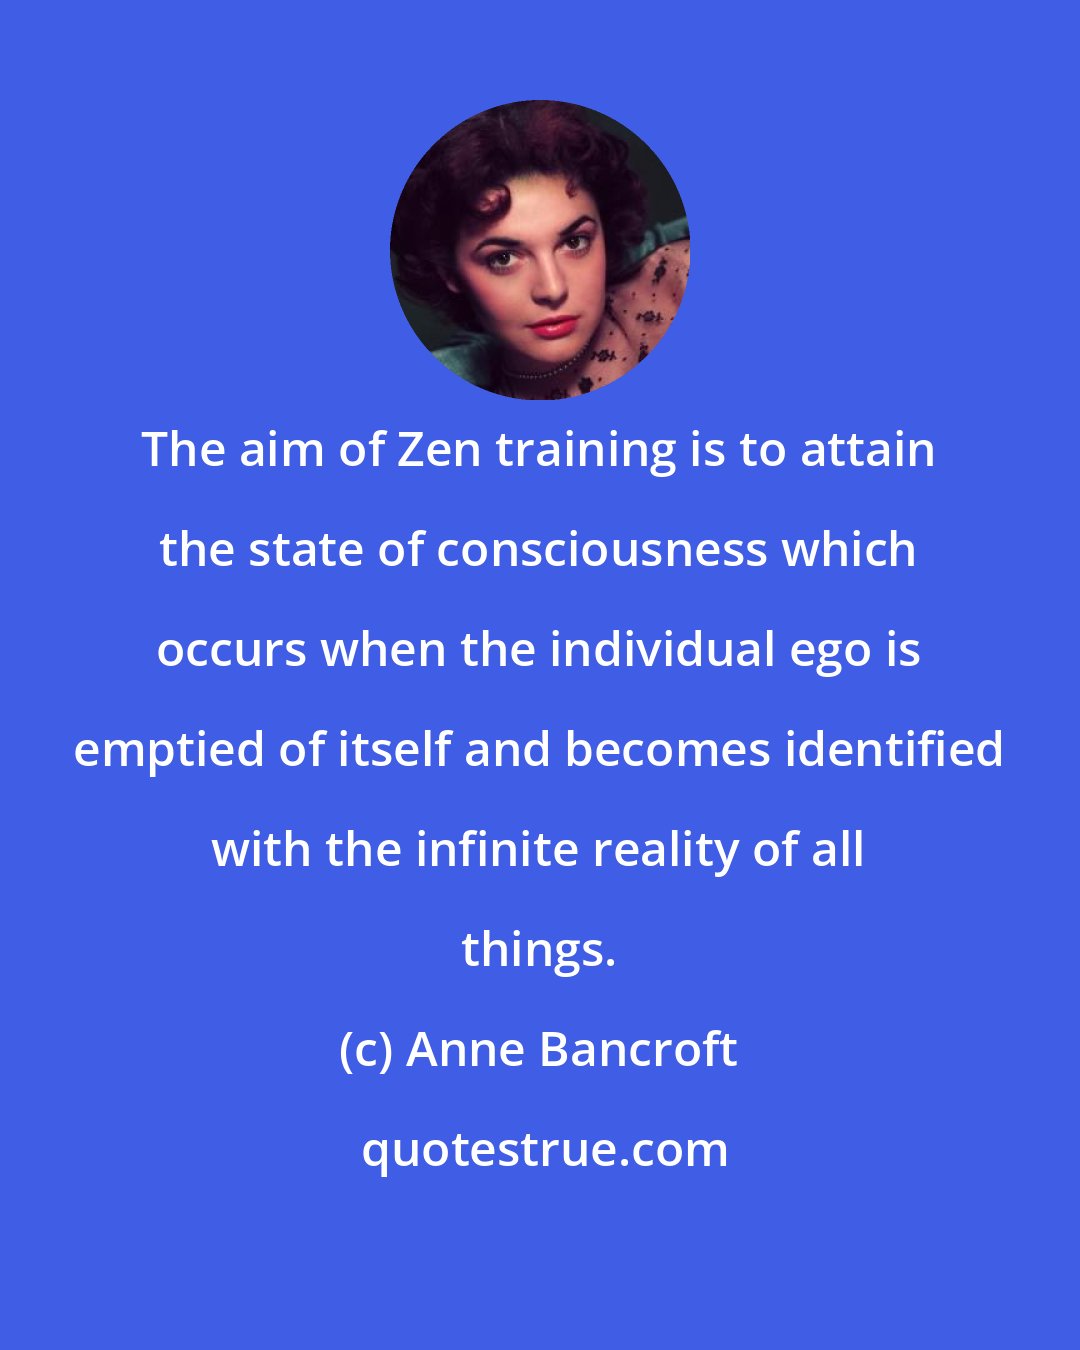 Anne Bancroft: The aim of Zen training is to attain the state of consciousness which occurs when the individual ego is emptied of itself and becomes identified with the infinite reality of all things.